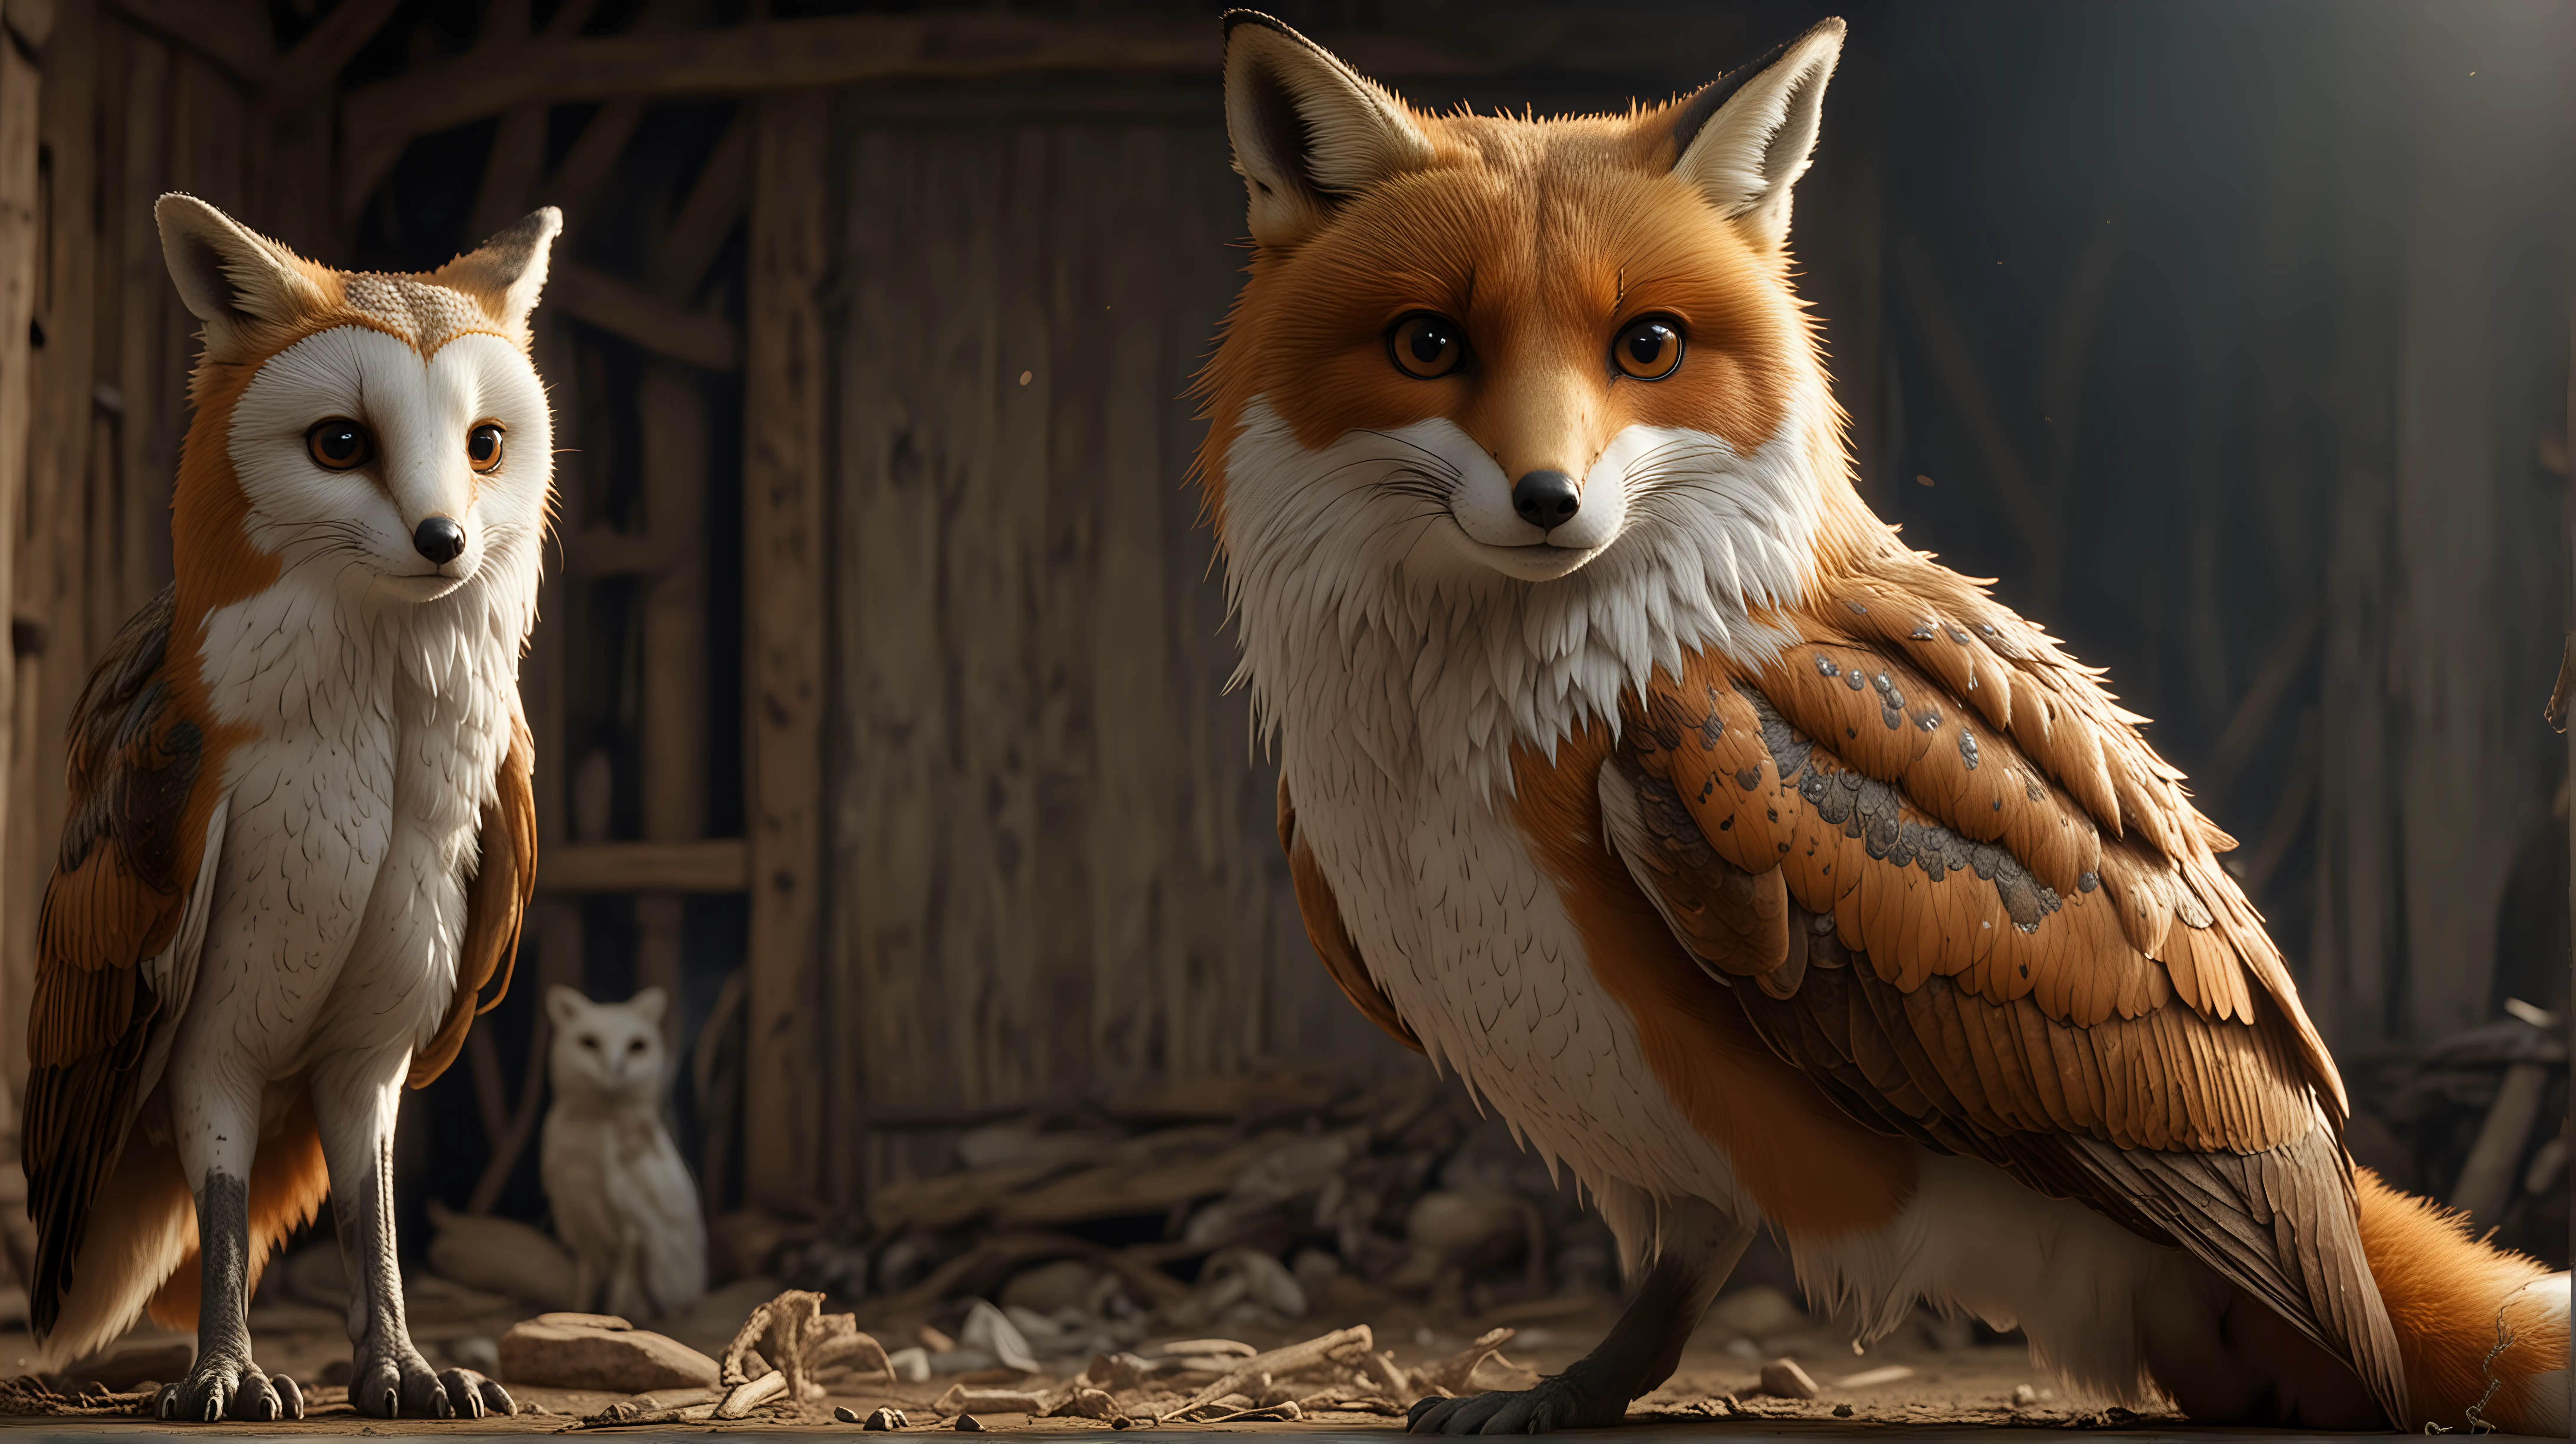 HyperRealistic Fox with Barn Owl Features Standing Tall in Detailed 4K View